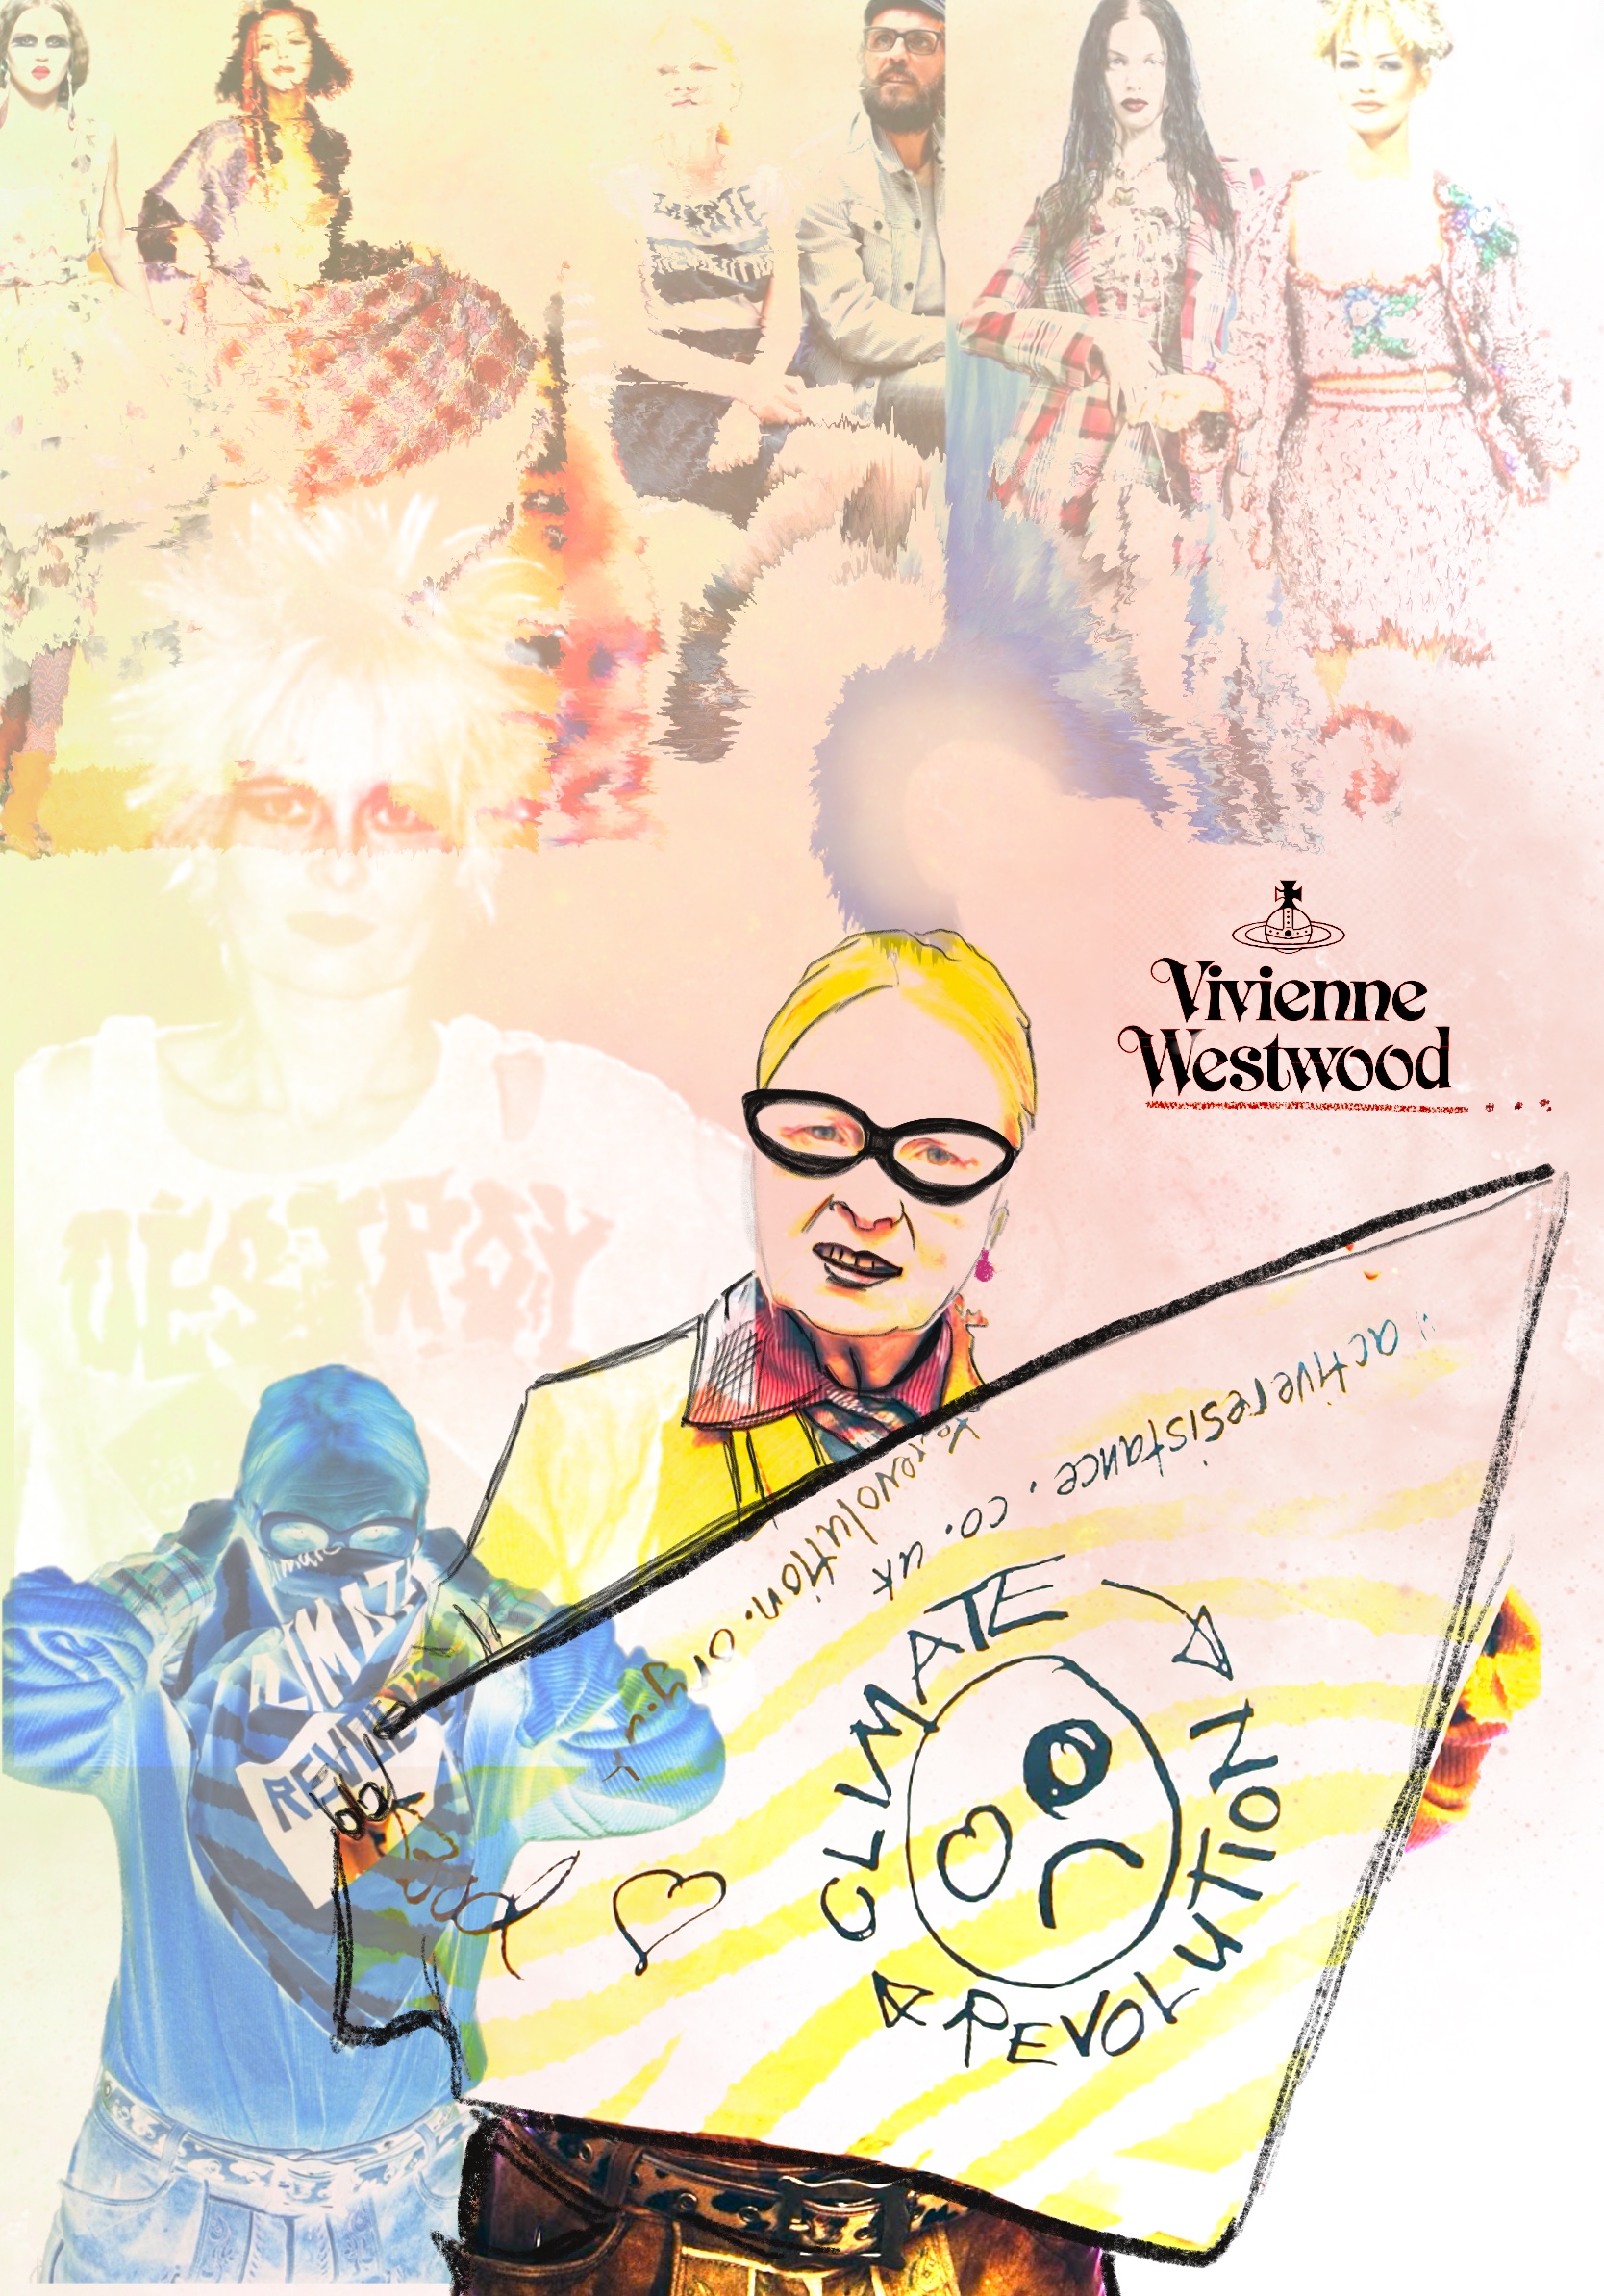 An illustration and montage of Vivienne Westwood. The foreground shows Westwood wearing glasses holding a sign bearing a logo of a frowning face with the phrase 'Climate - Revolution -'.